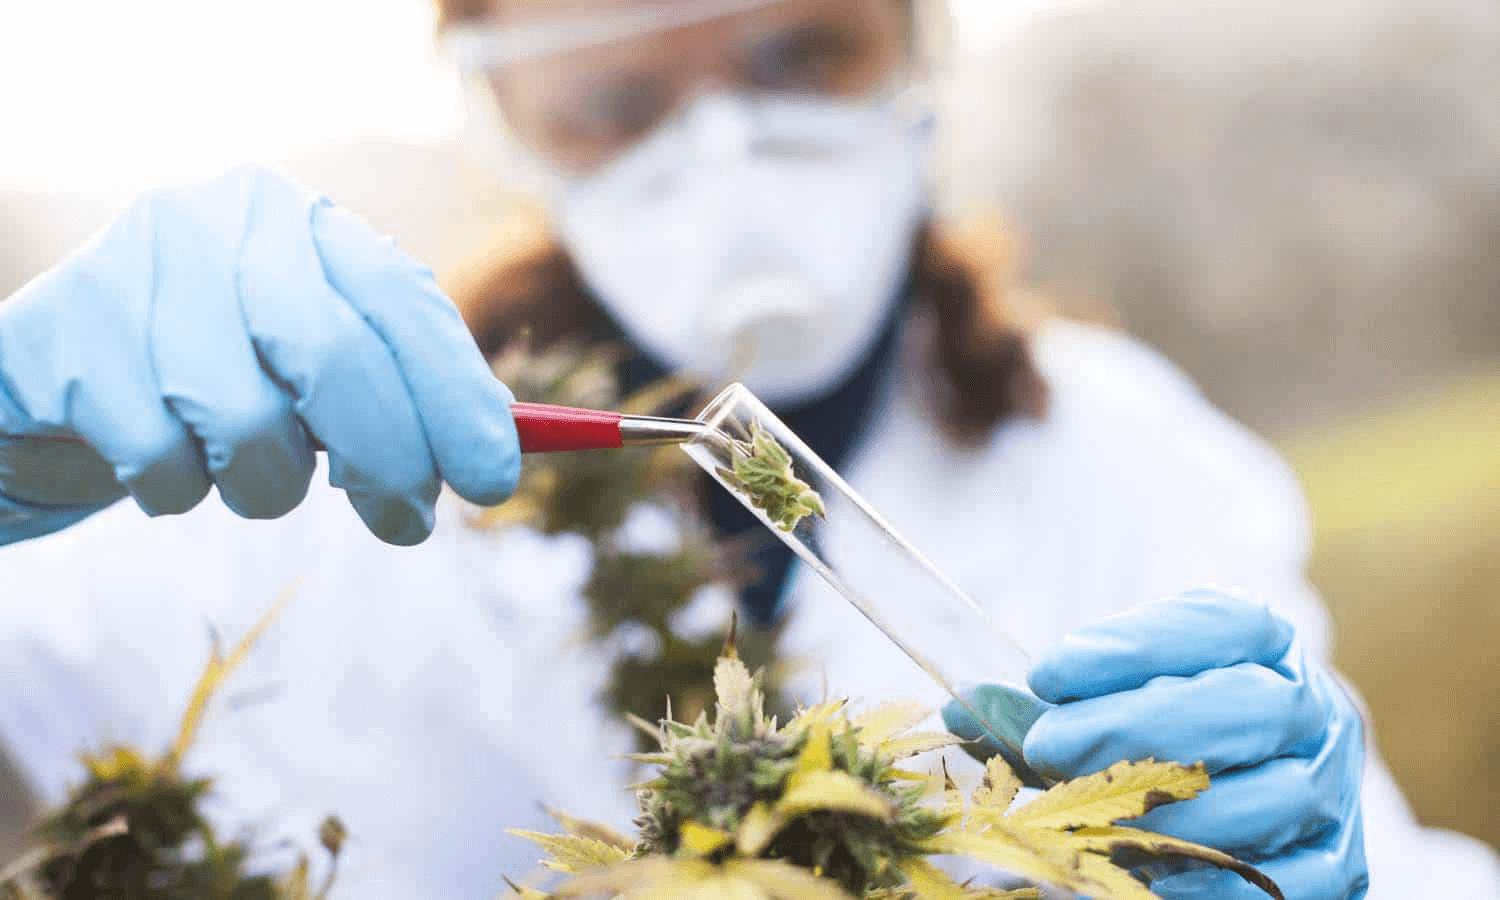 A woman wearing lab gown, lab eye shield, and gloves inserting a cannabis plant into a test tube